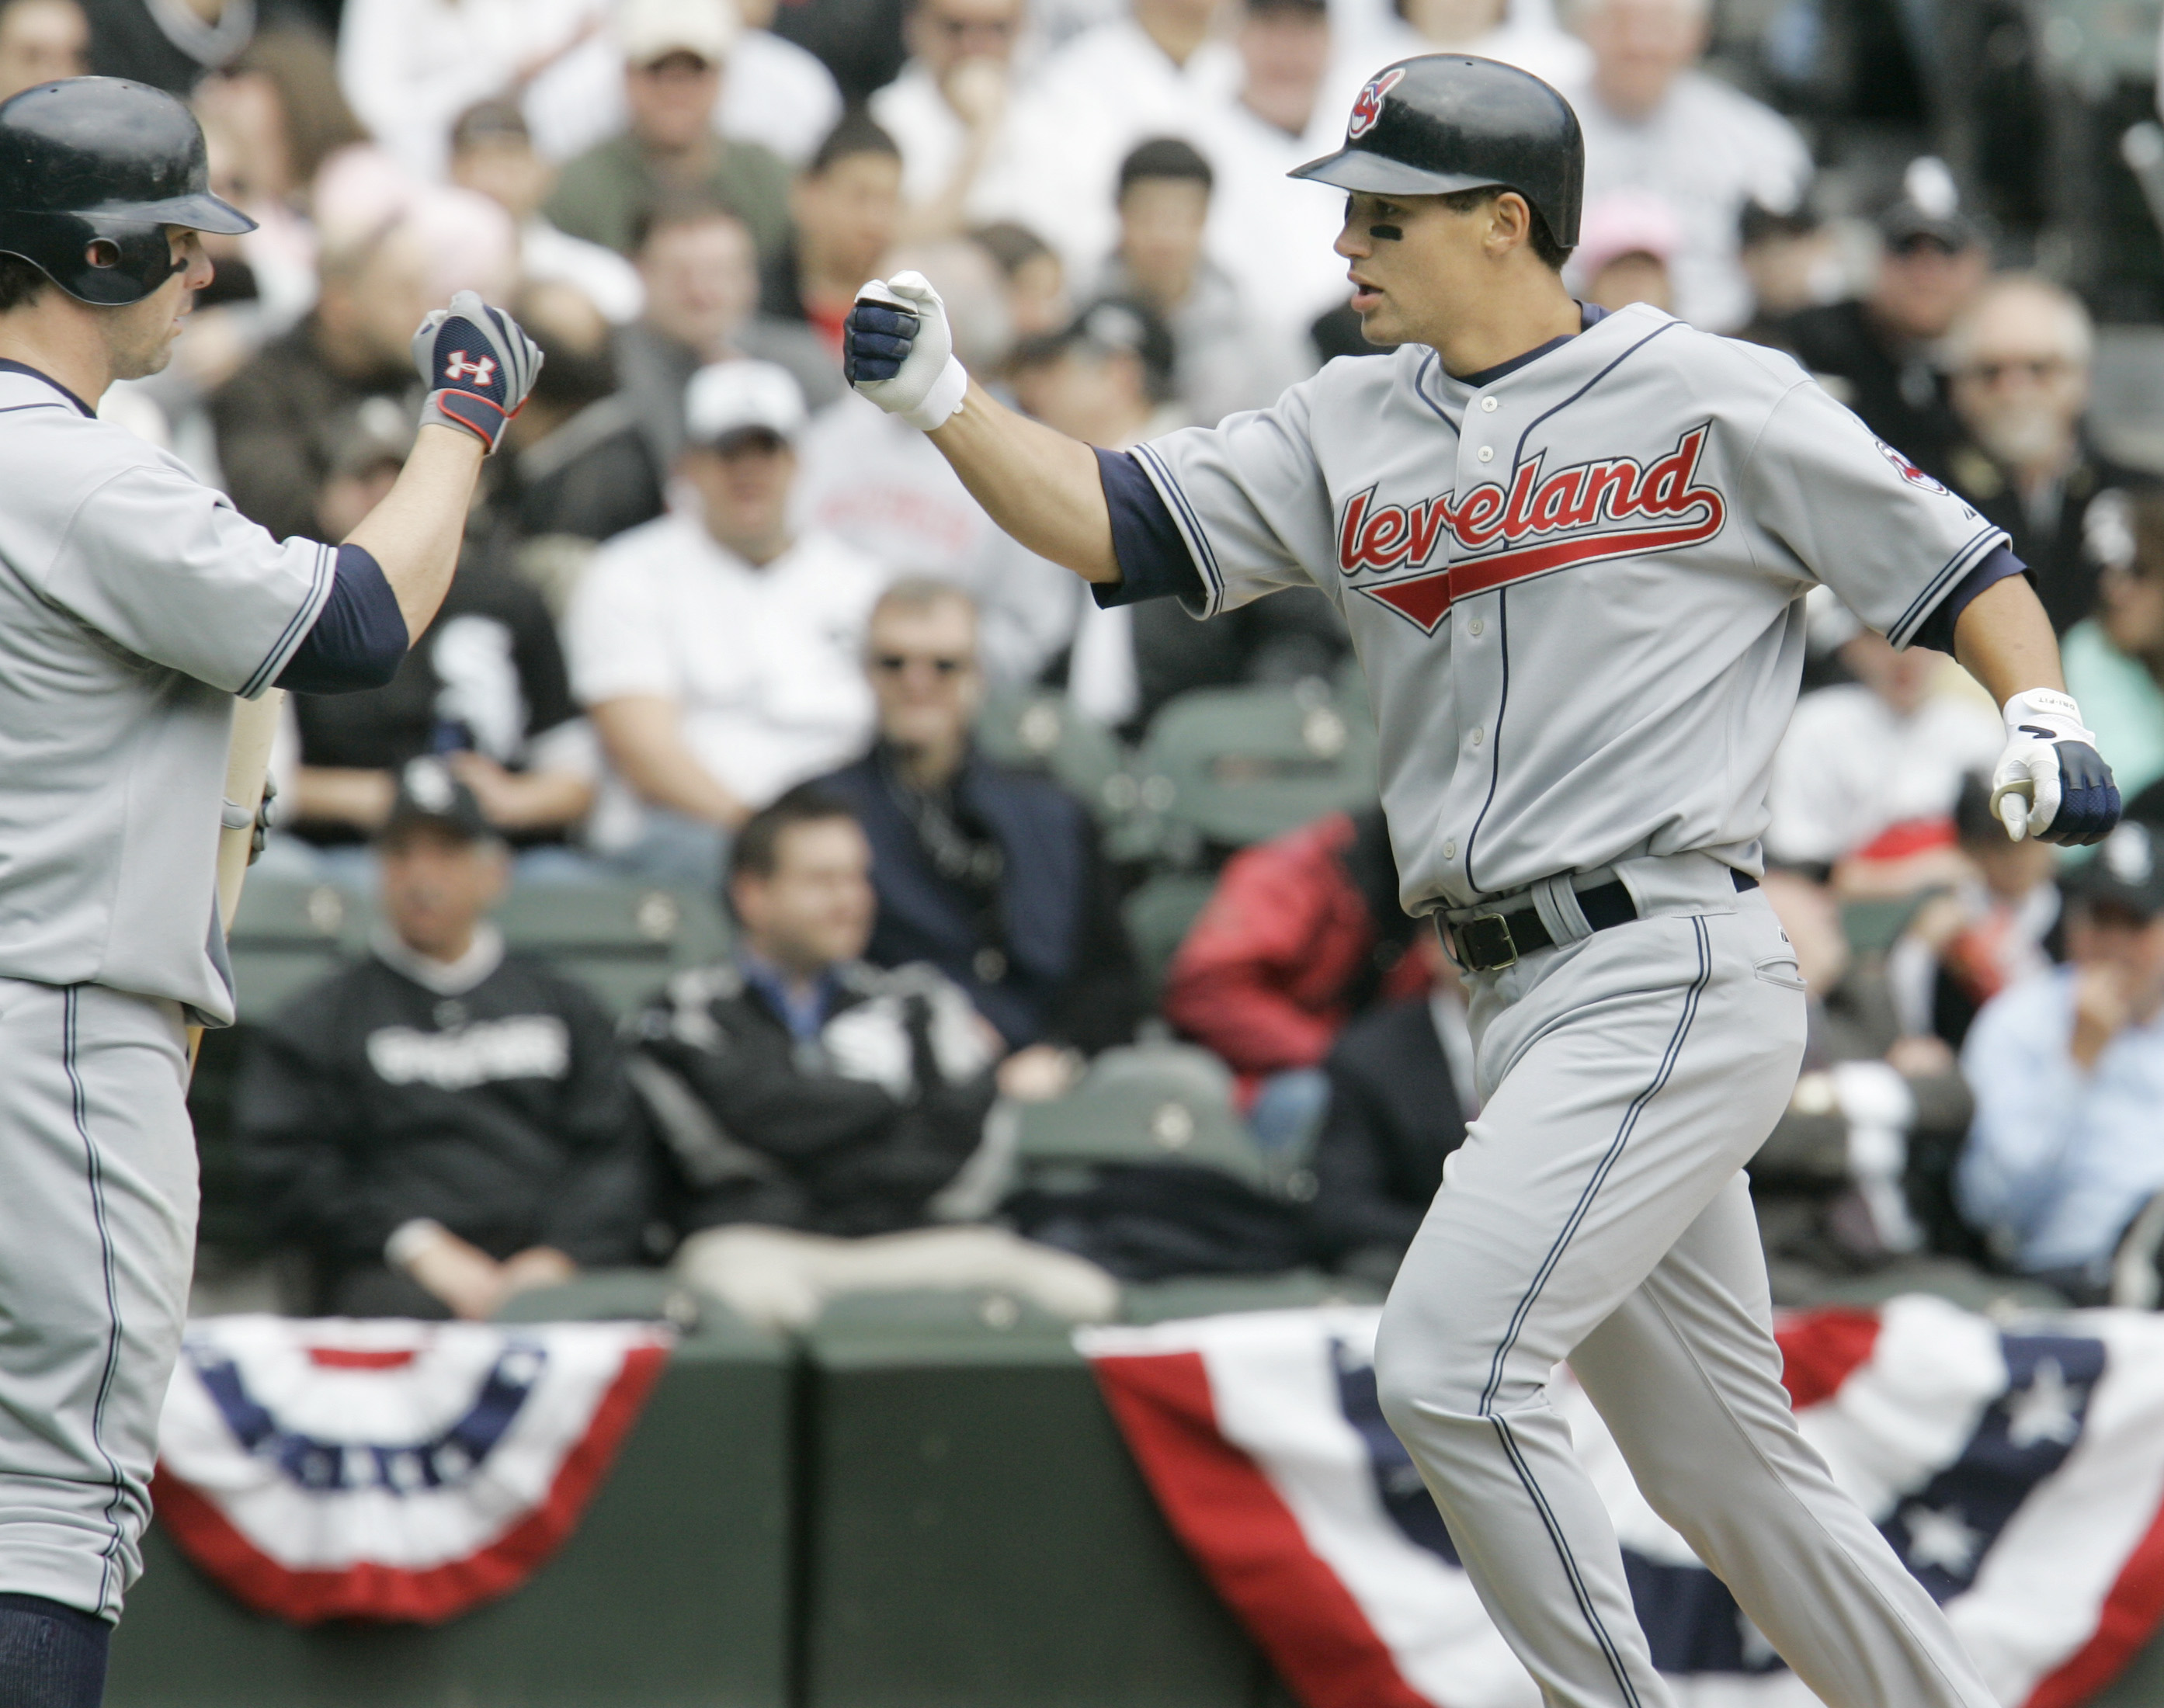 Notes: Grady Sizemore back with Indians - The Boston Globe